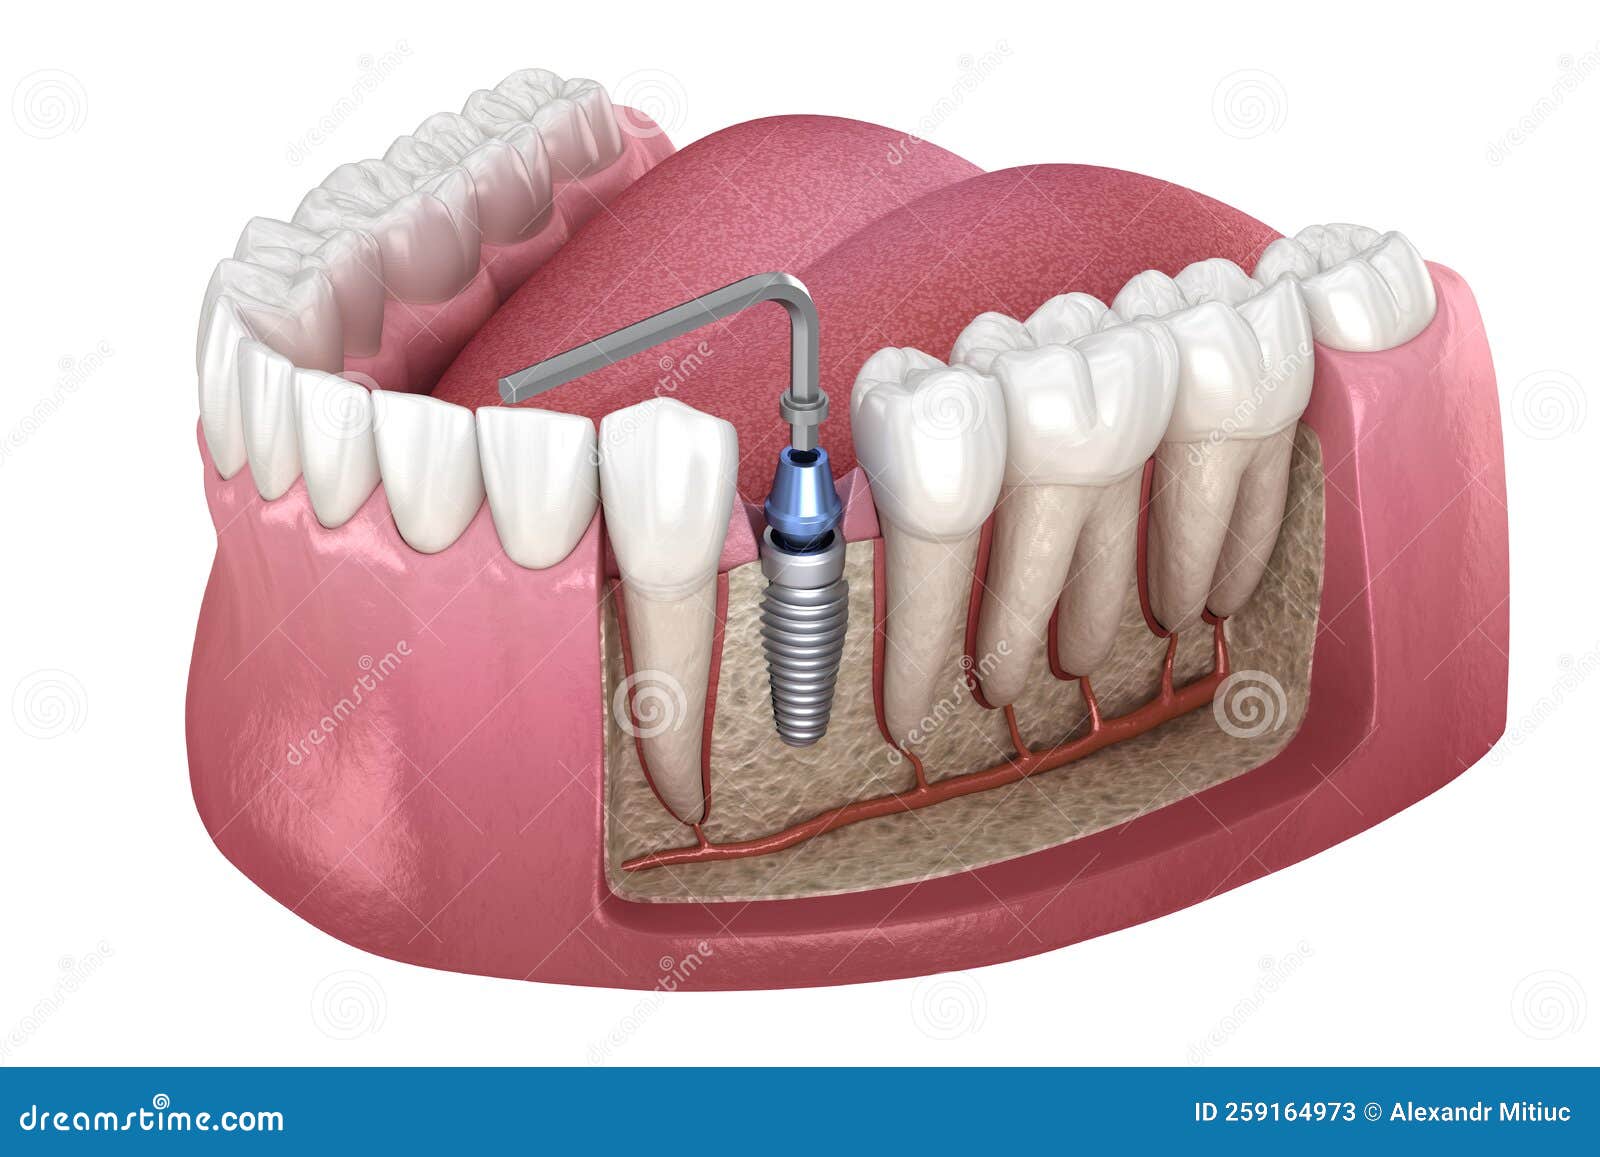 implant abutment fixation procedure. medically accurate 3d  of human teeth and dentures concept